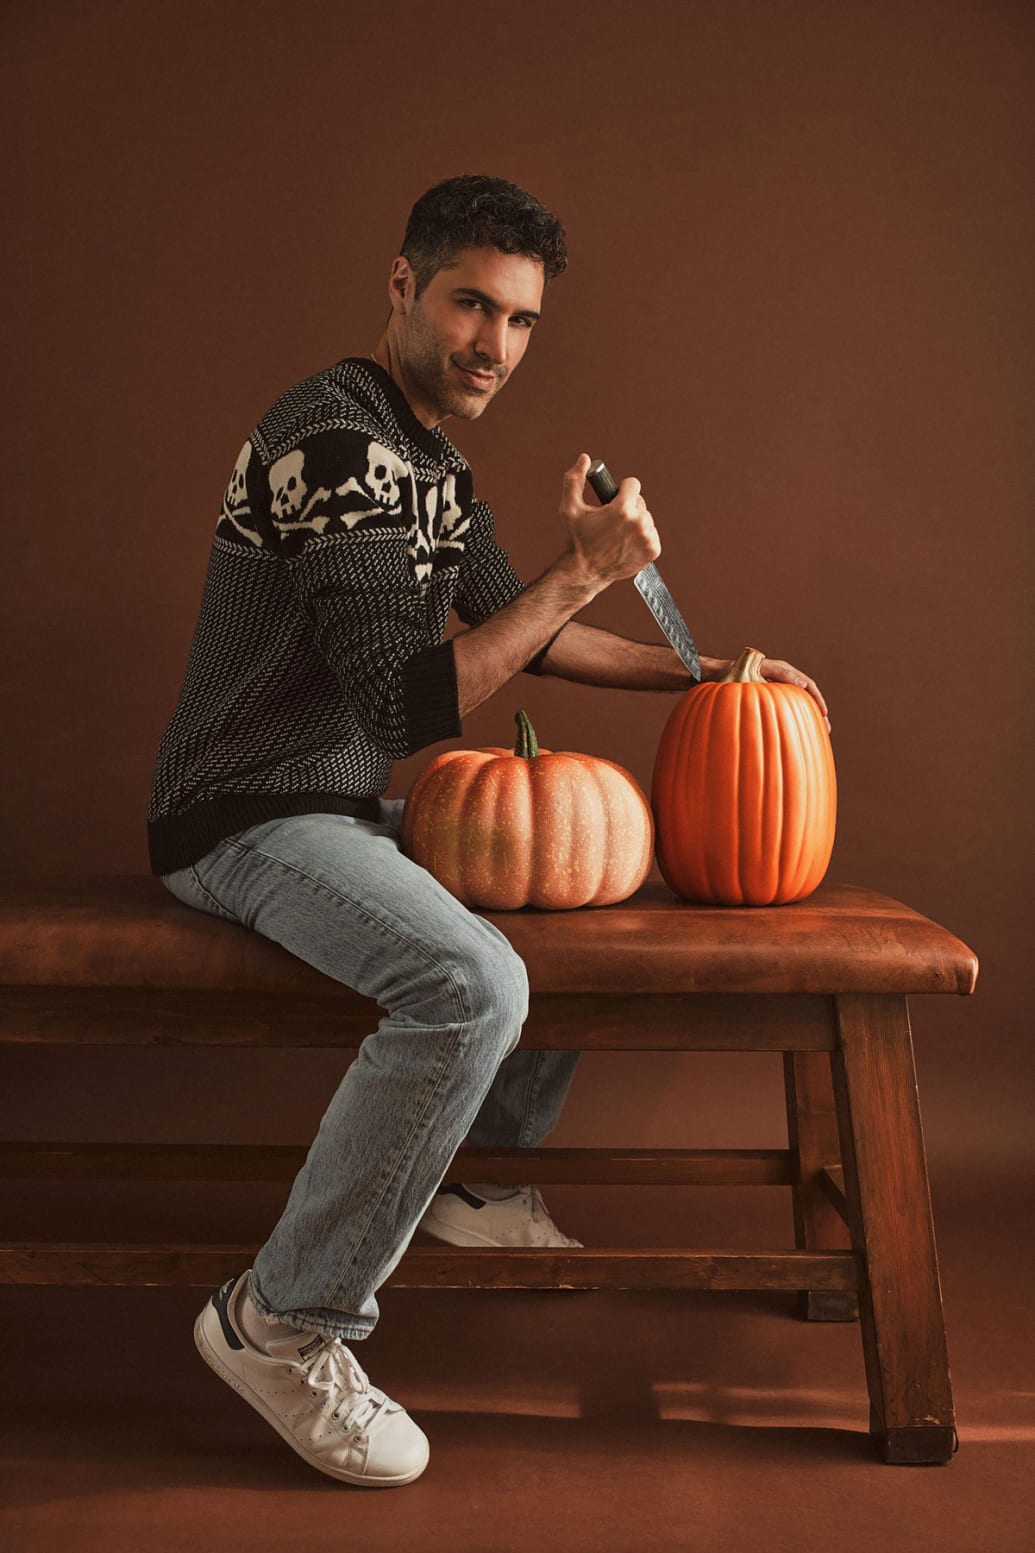 Danny Pellegrino with a knife and pumpkins